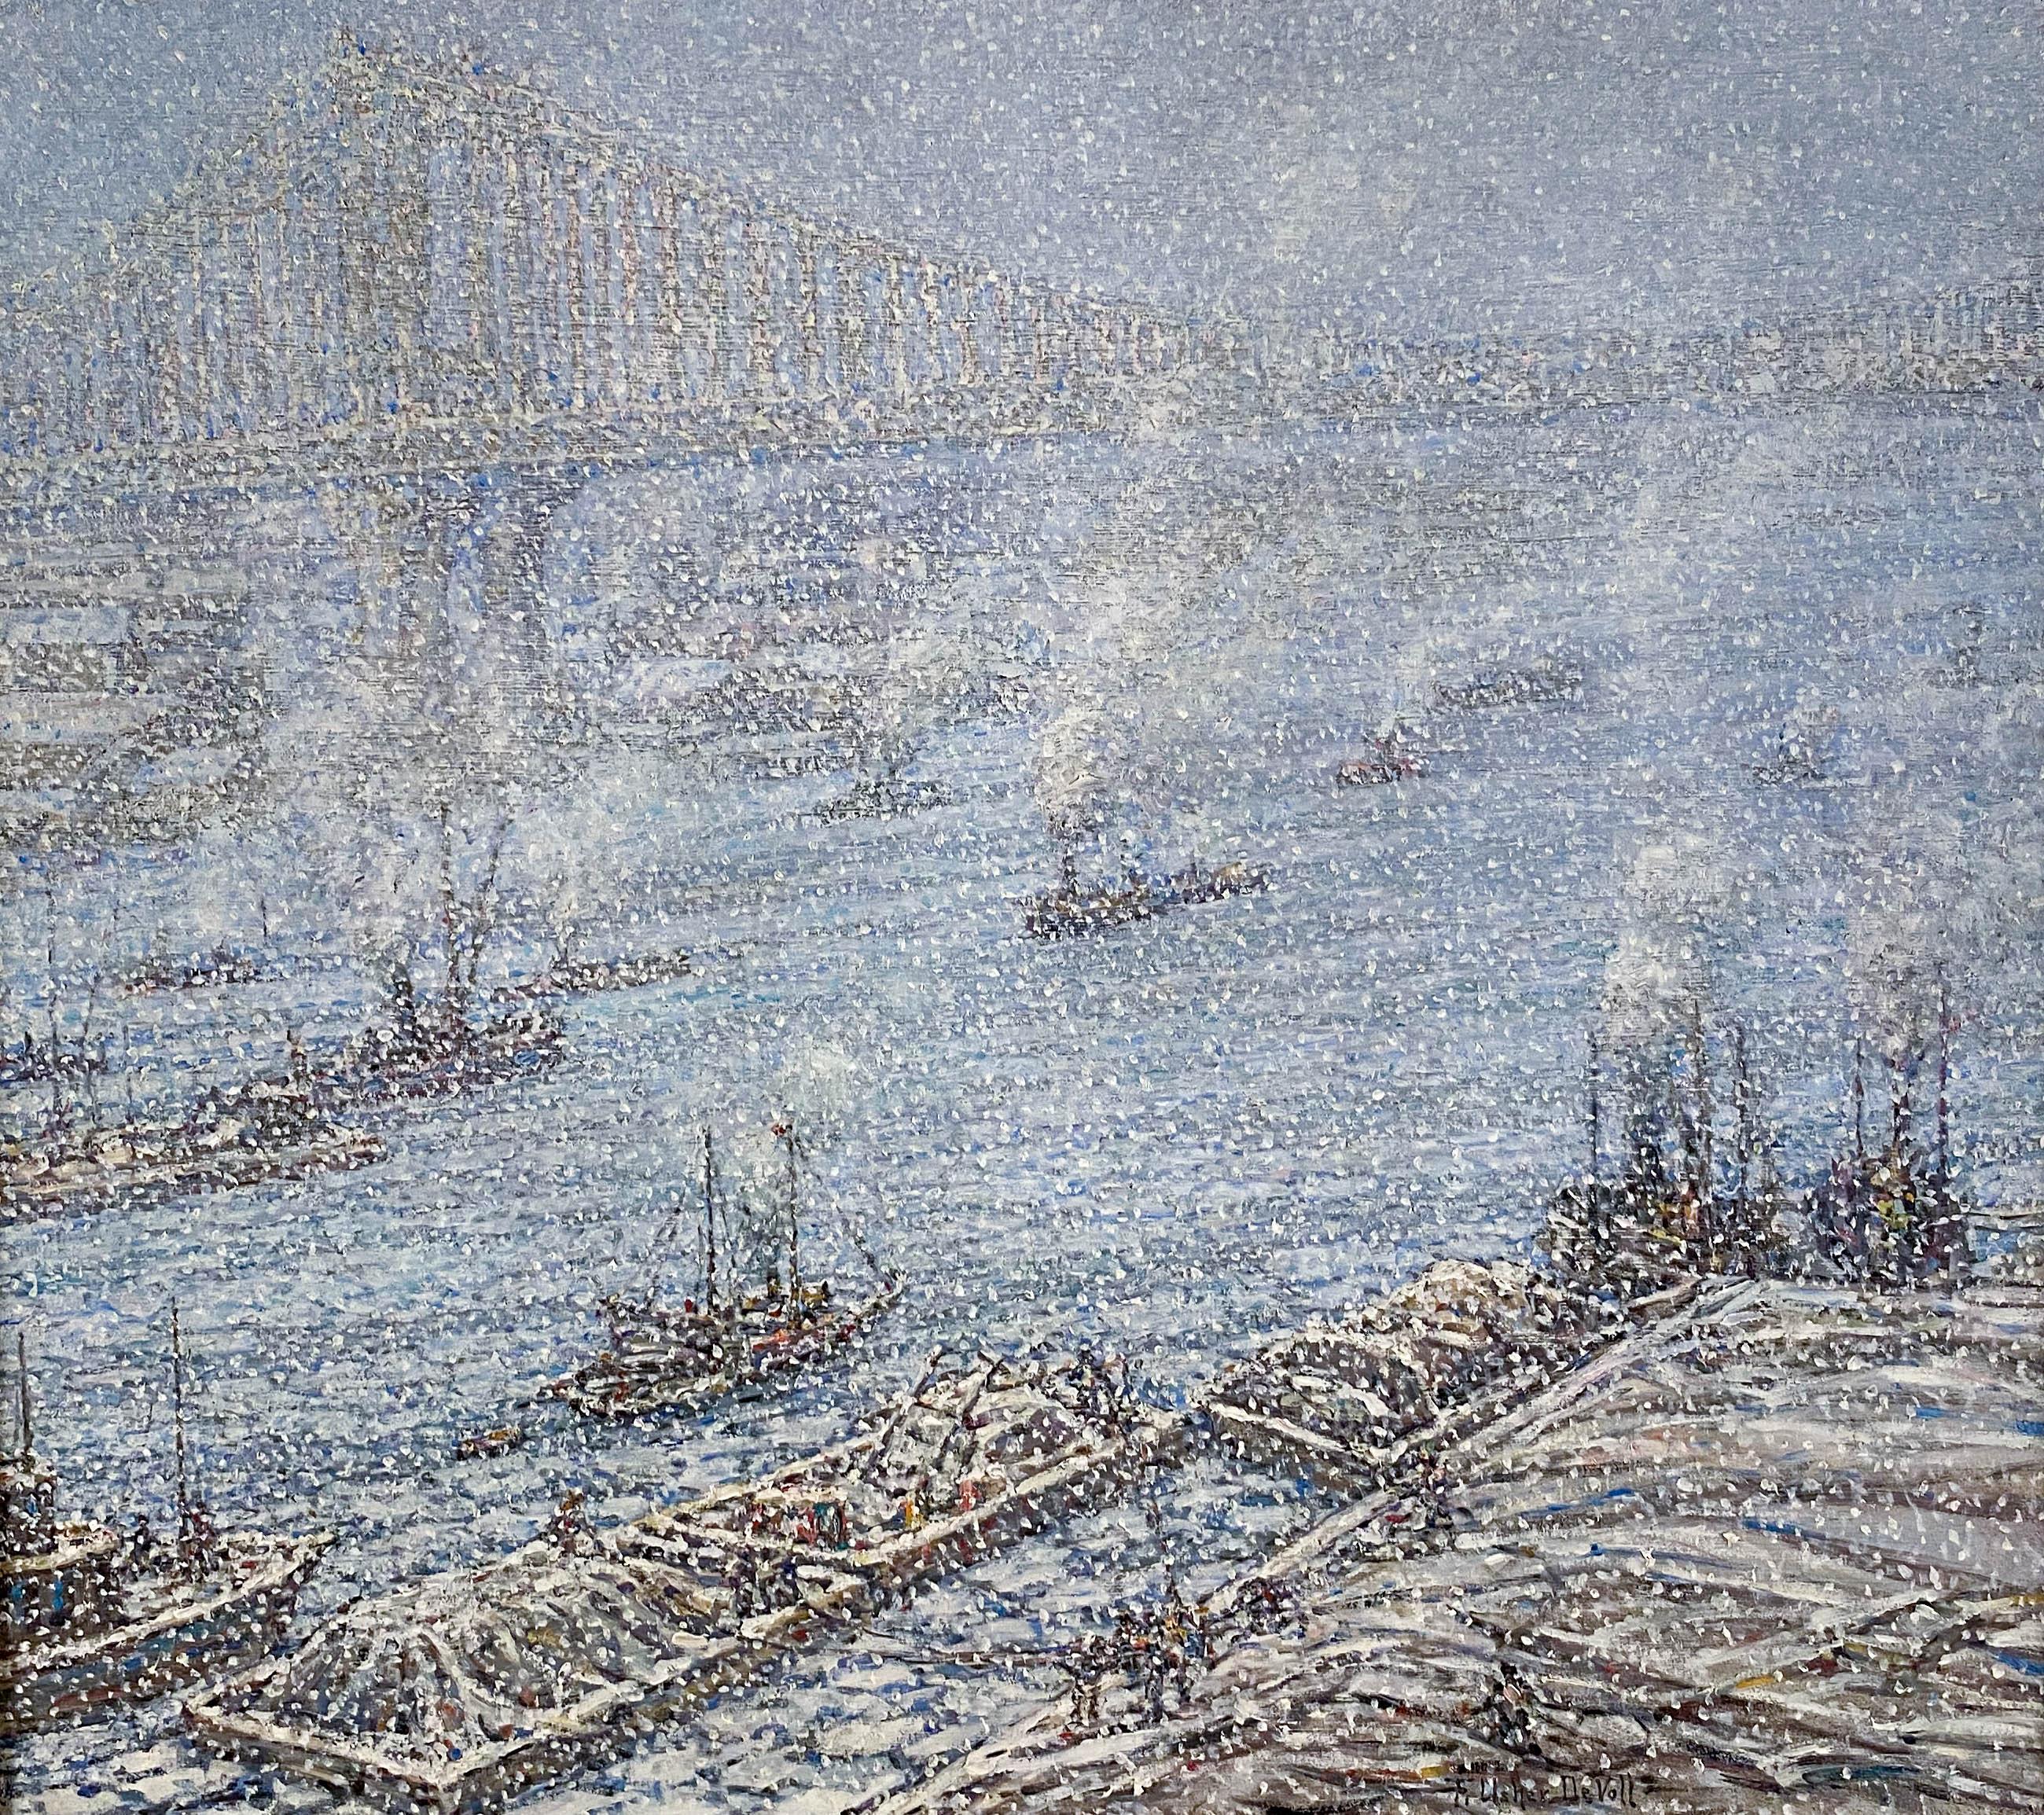 East River, New York Winter (From Brooklyn Bridge) - Painting by Frank Usher De Voll